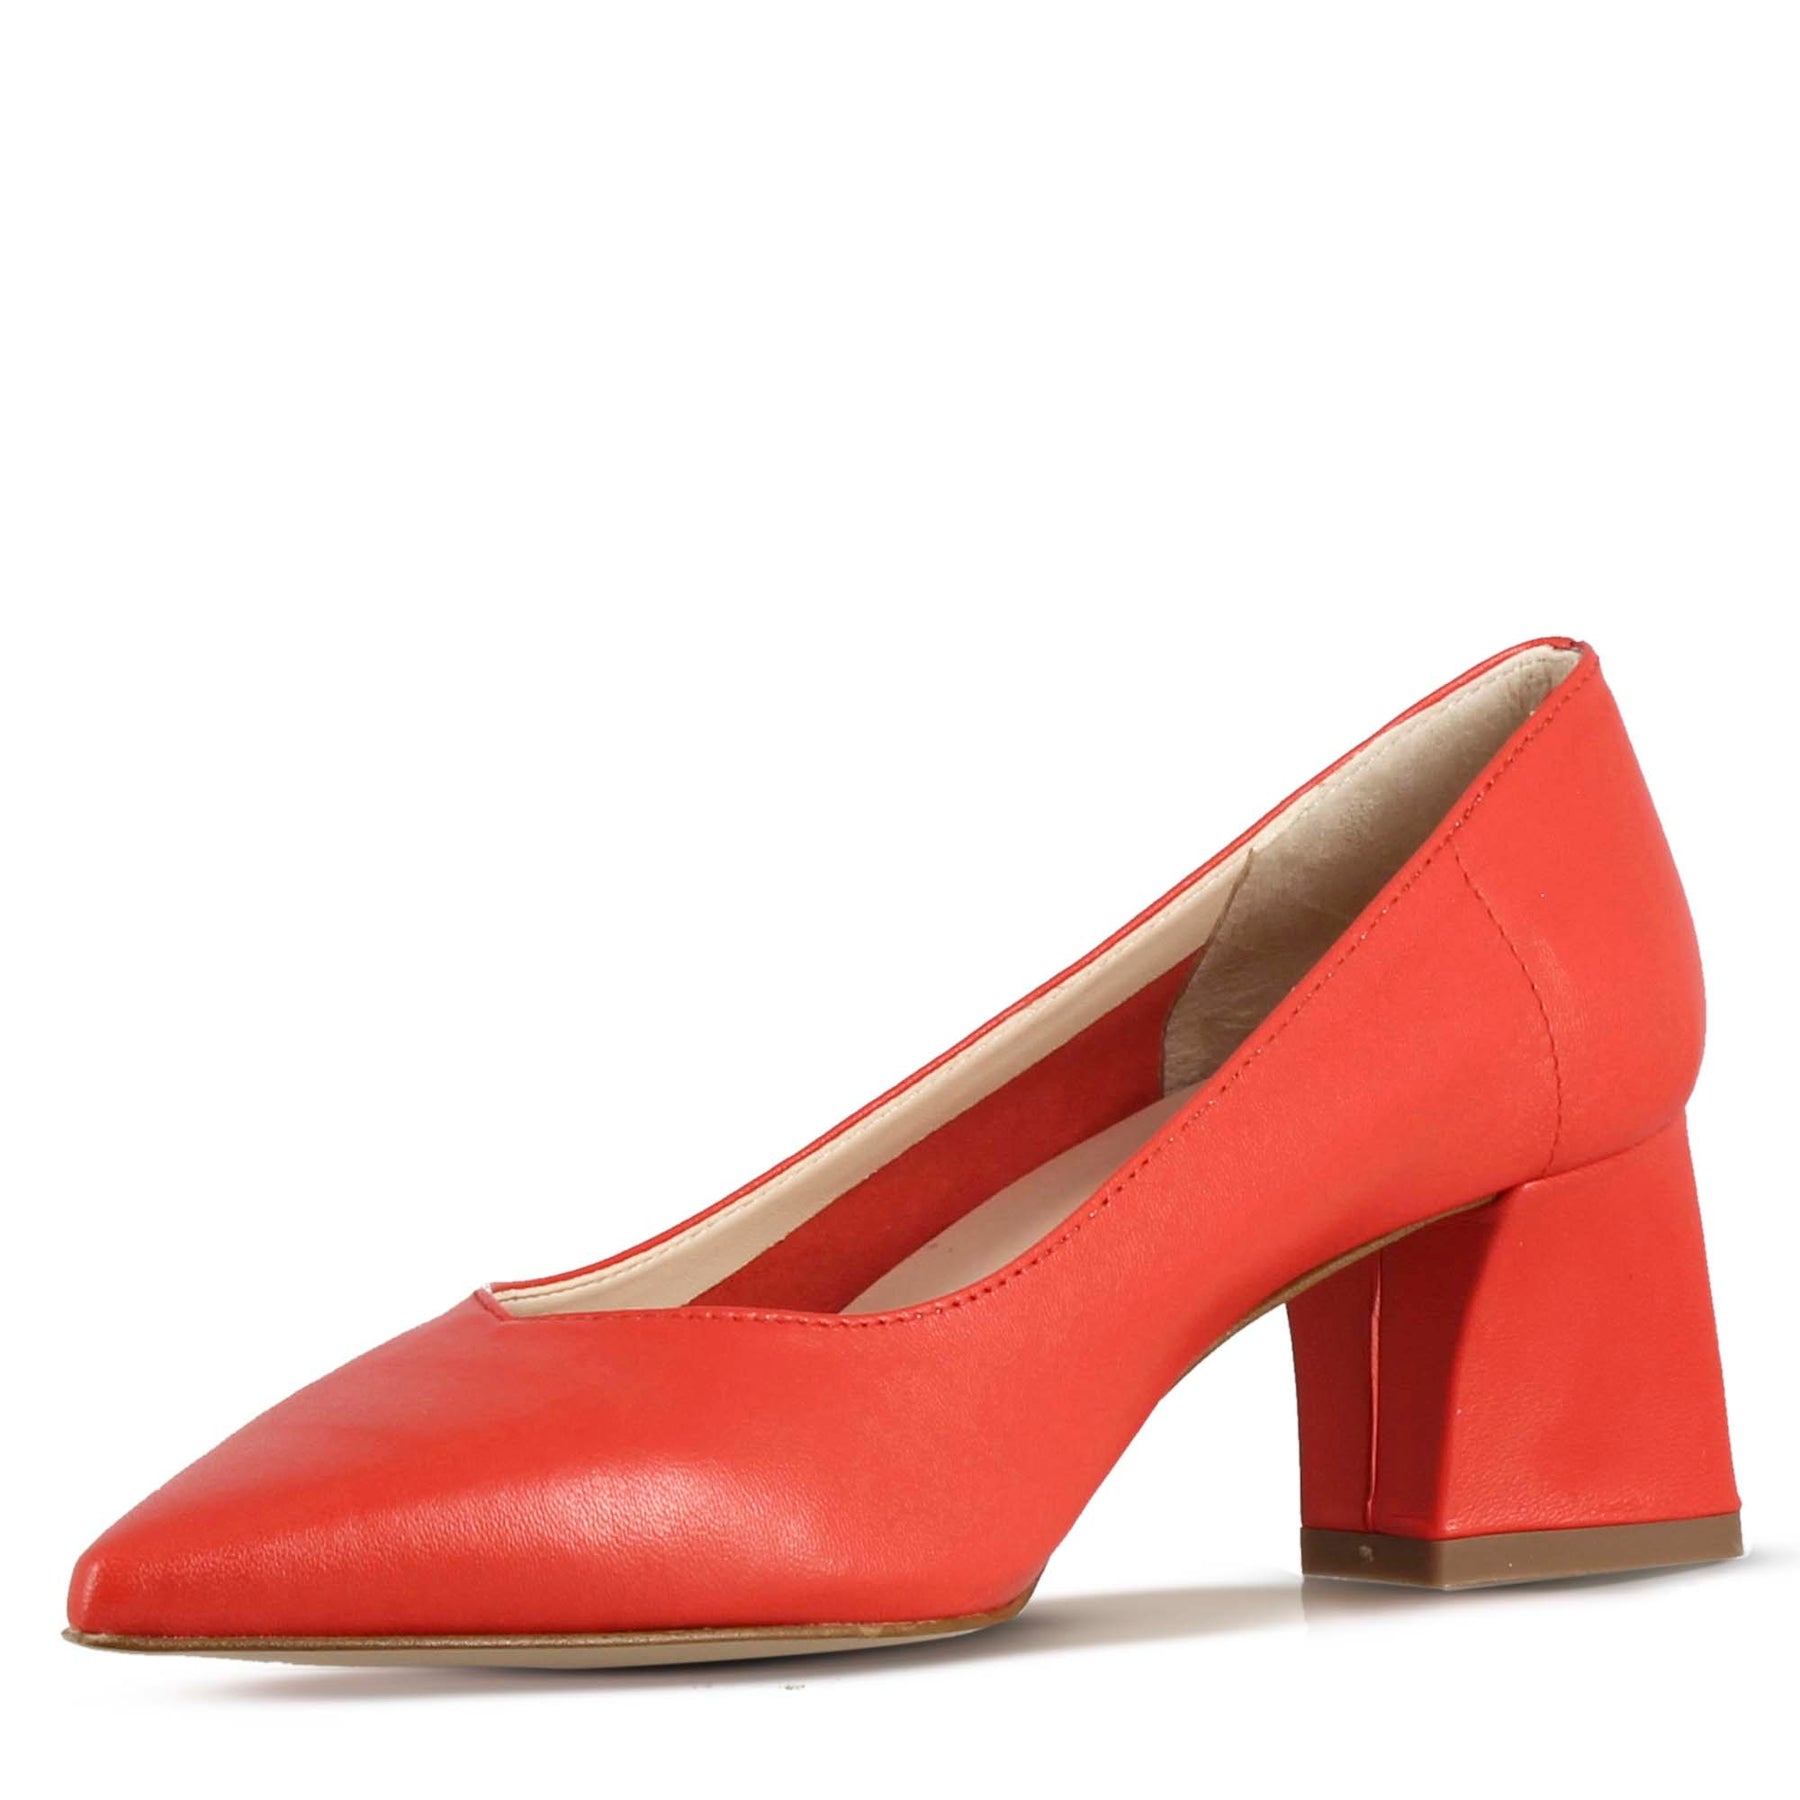 Women's pumps in red leather with medium heel